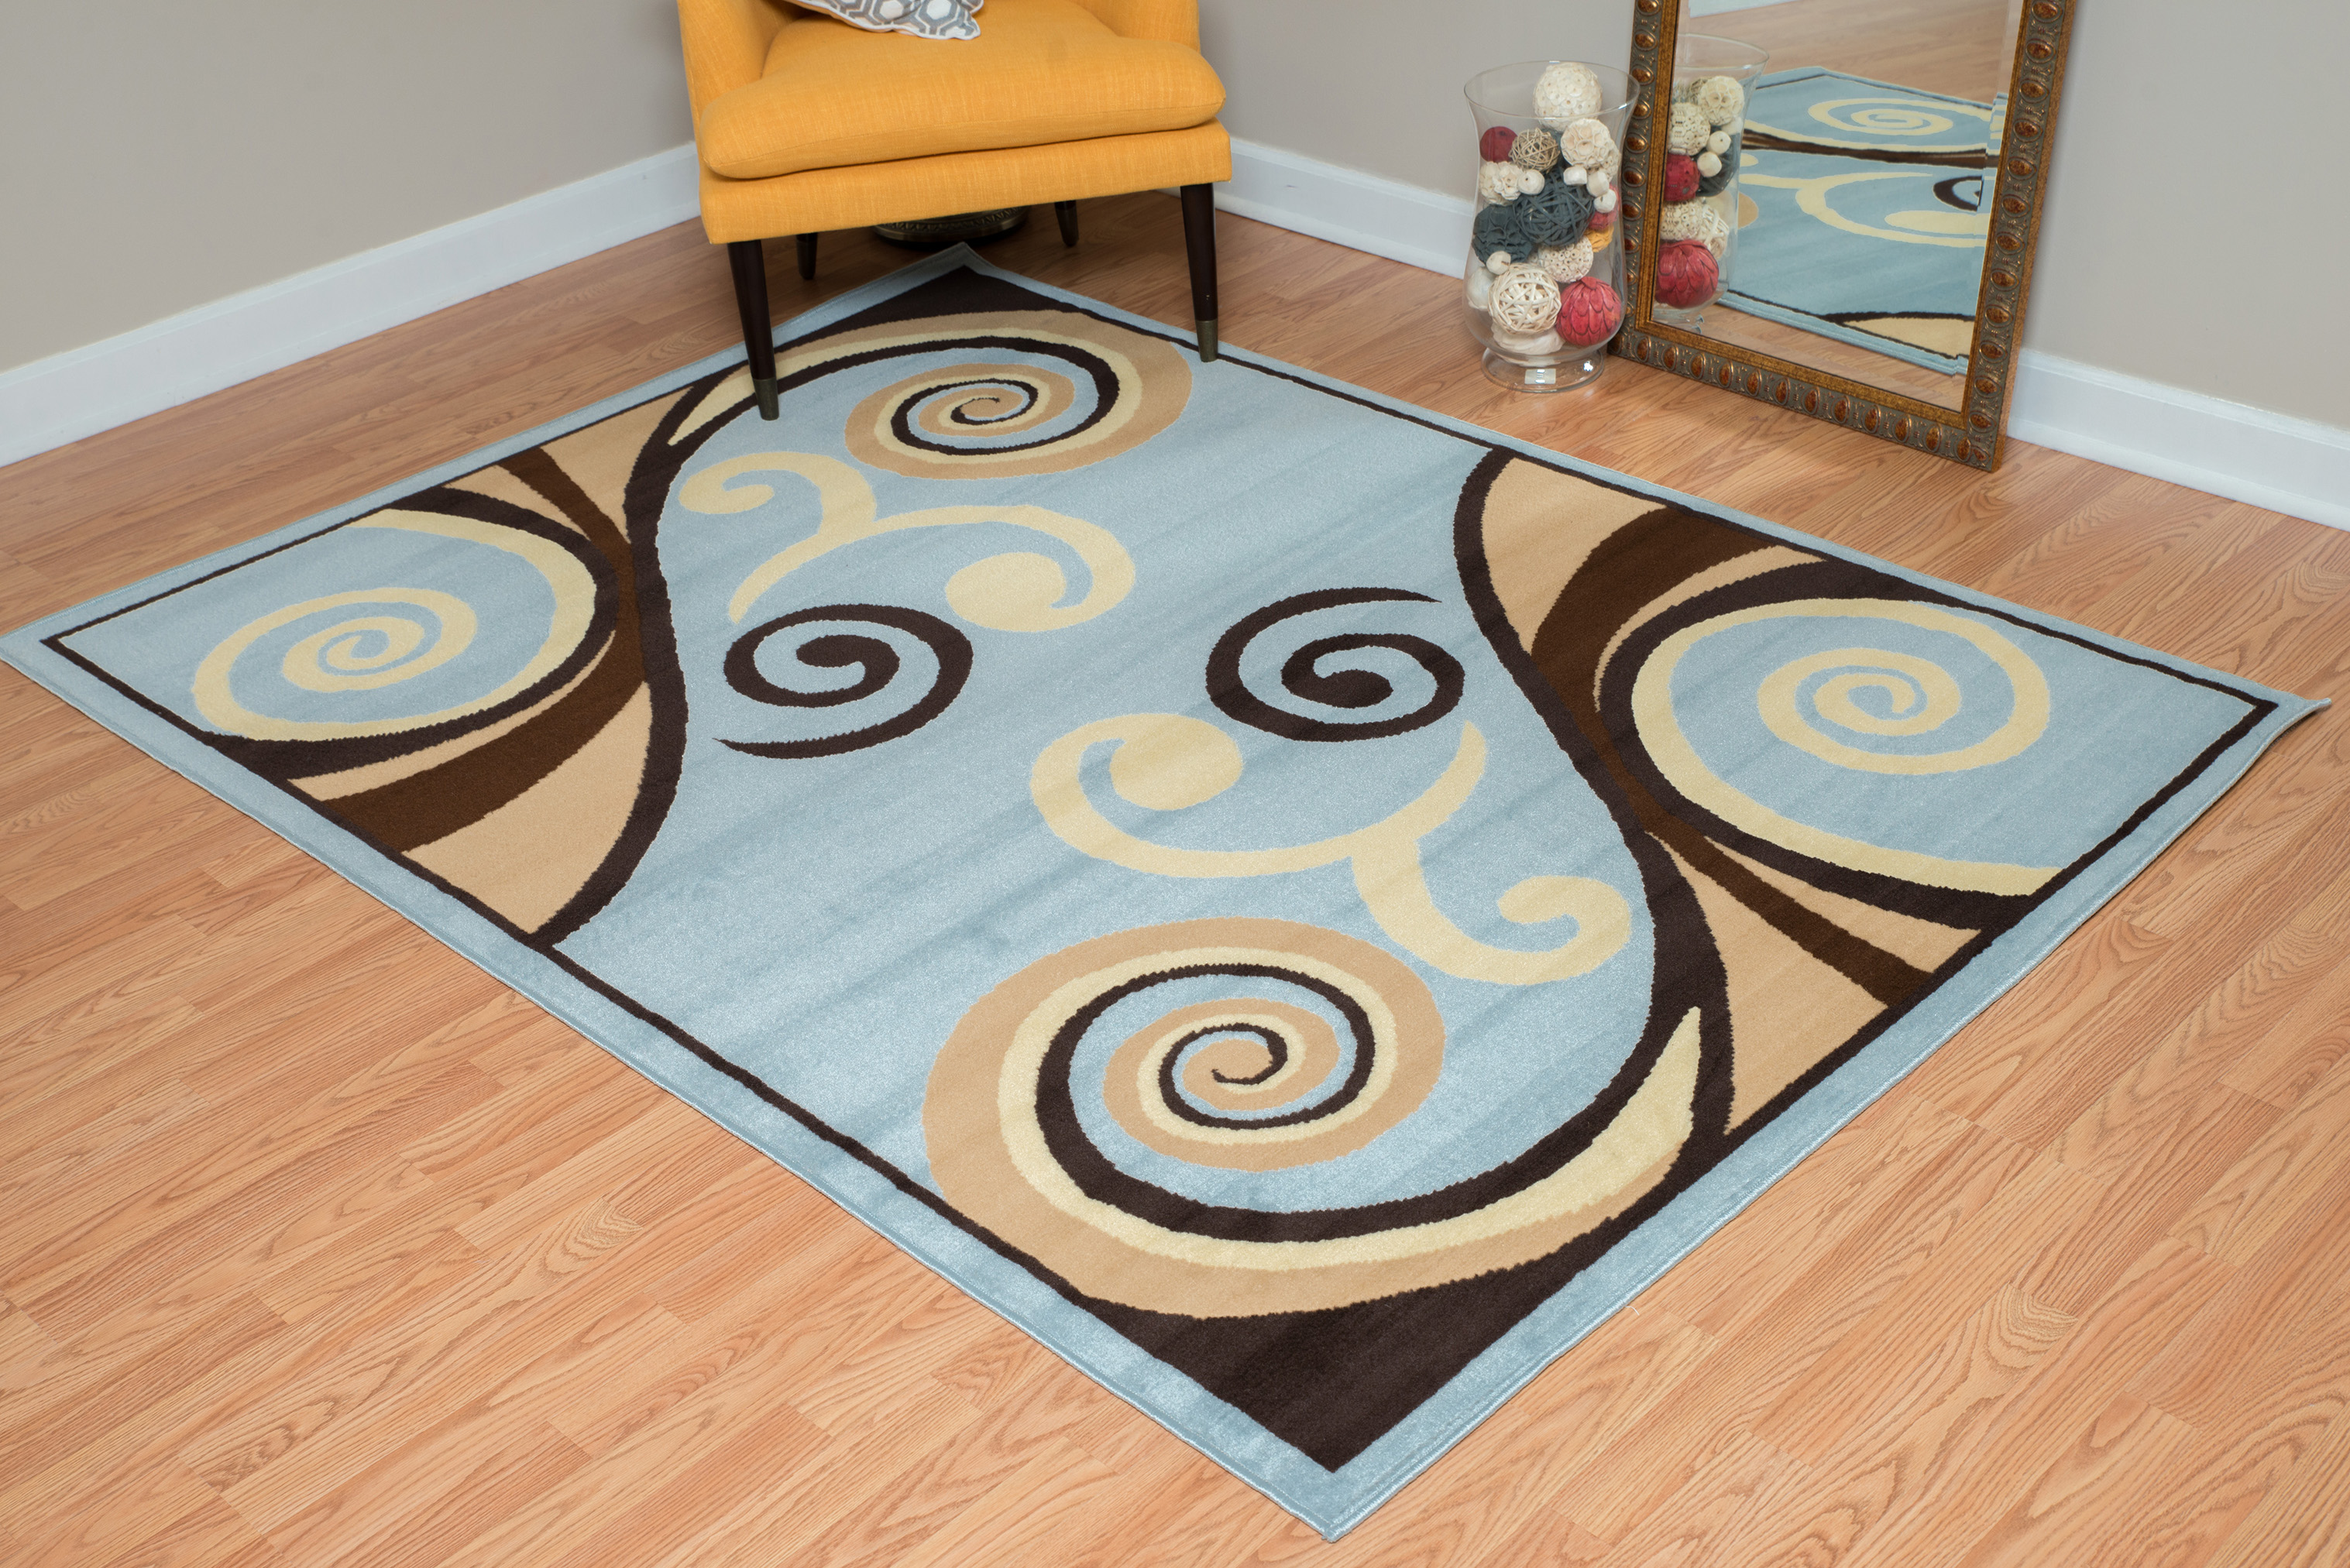 Designer Home Soft Transitional Indoor Modern Area Rug Curvy Swirls  - Actual Size: 2' 3" x 7' 2" Rectangle (Blue) - image 1 of 5